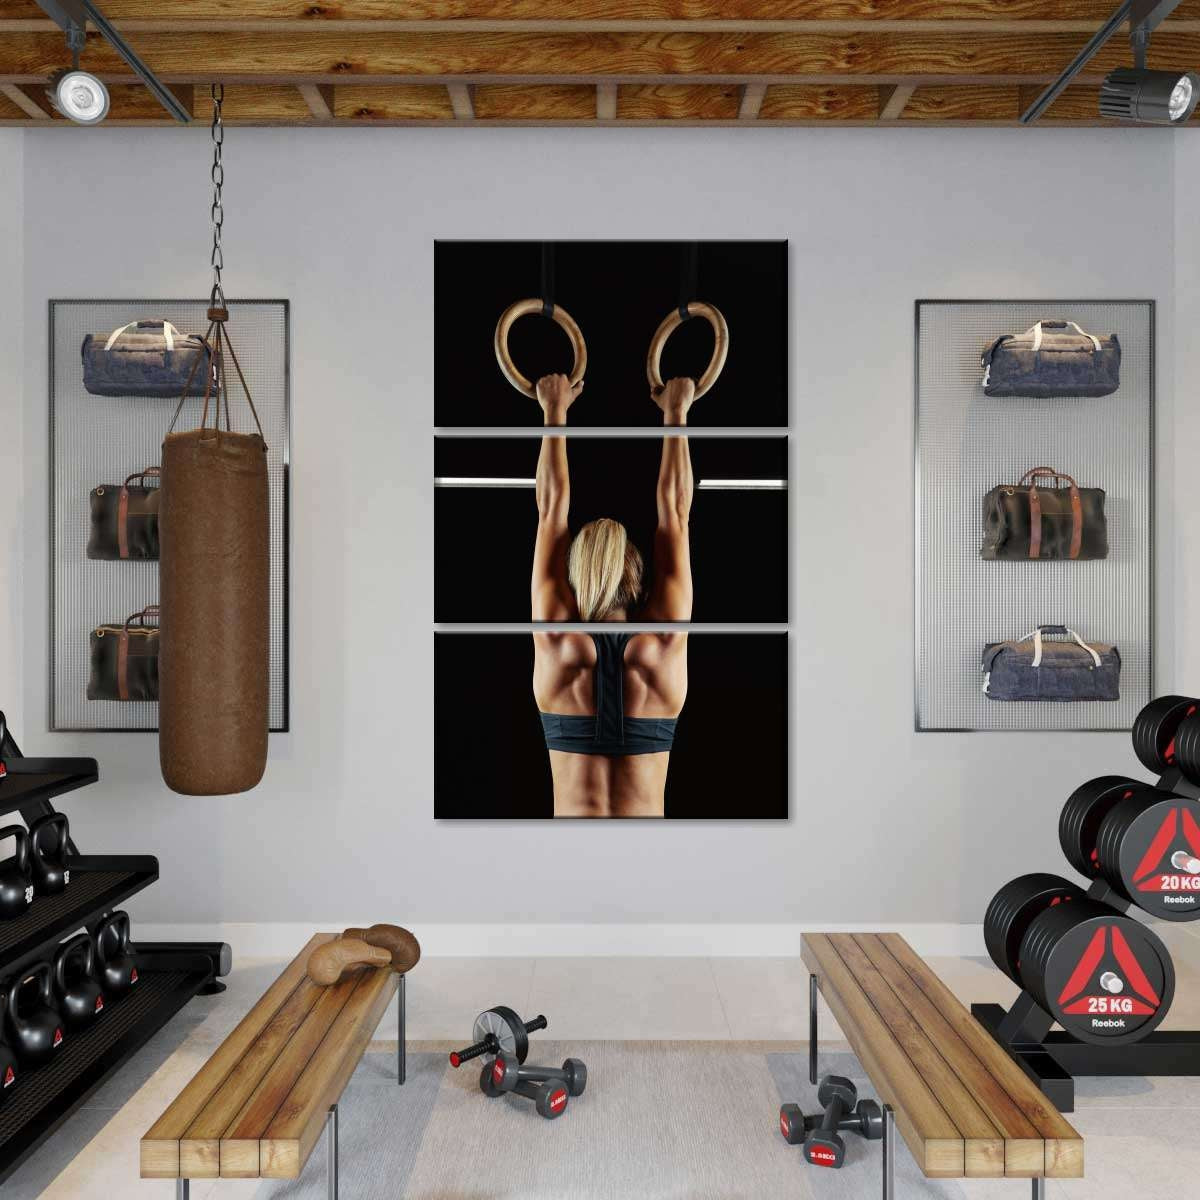 Installing a DIY mirror wall in your home gym - a how to